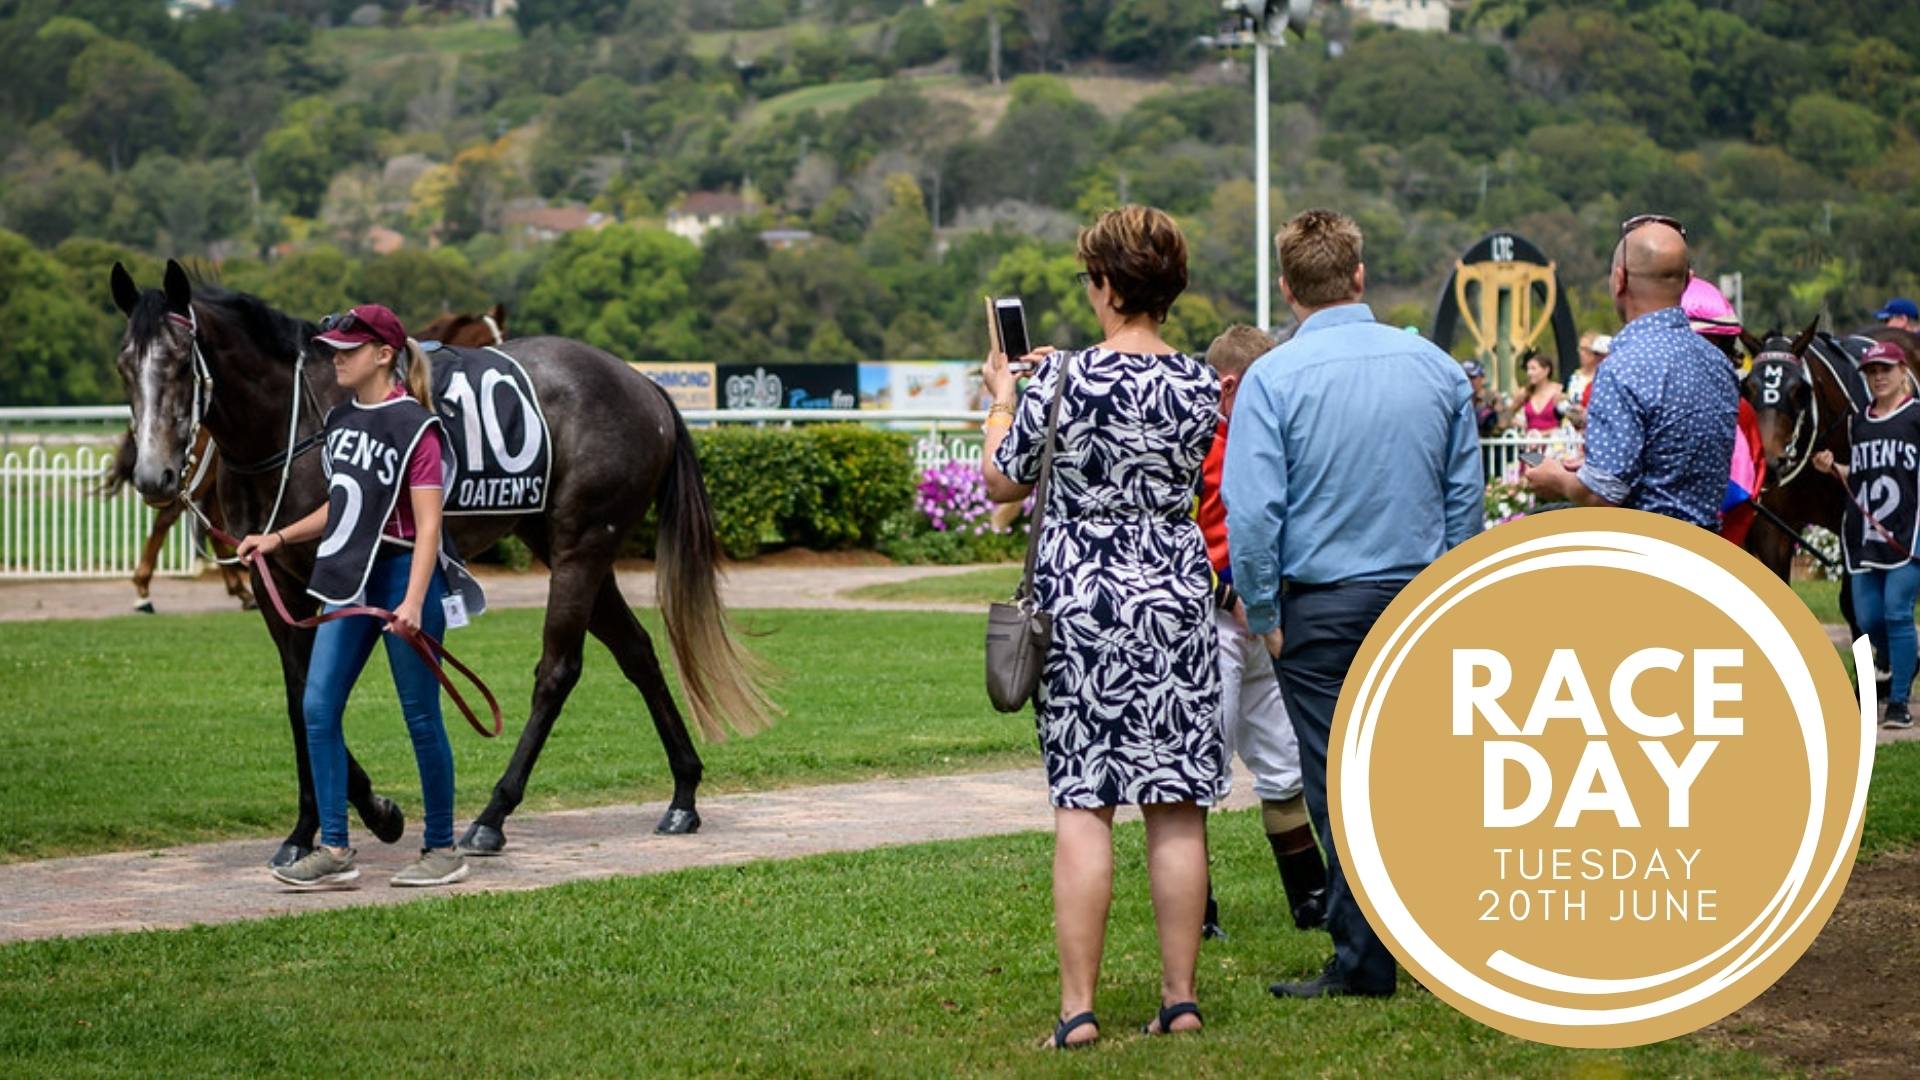 Lismore Turf Club Racing Venue, Weddings, Functions and Conference Venue